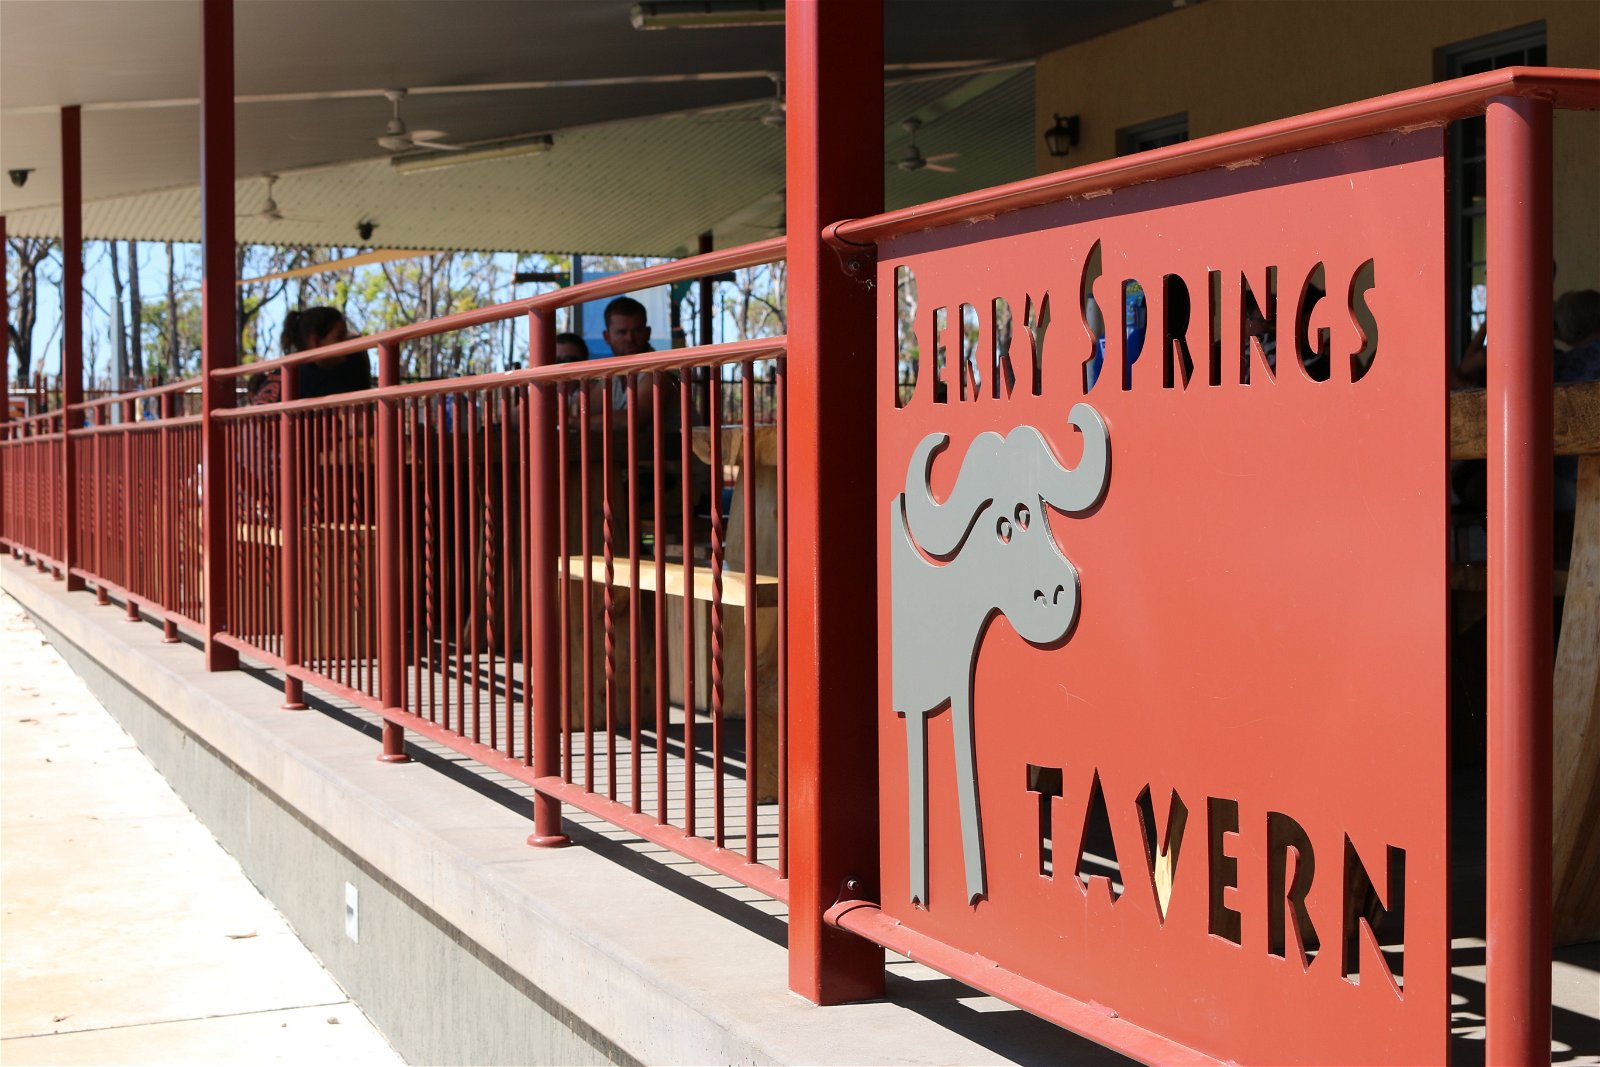 Berry Springs Tavern - Northern Rivers Accommodation